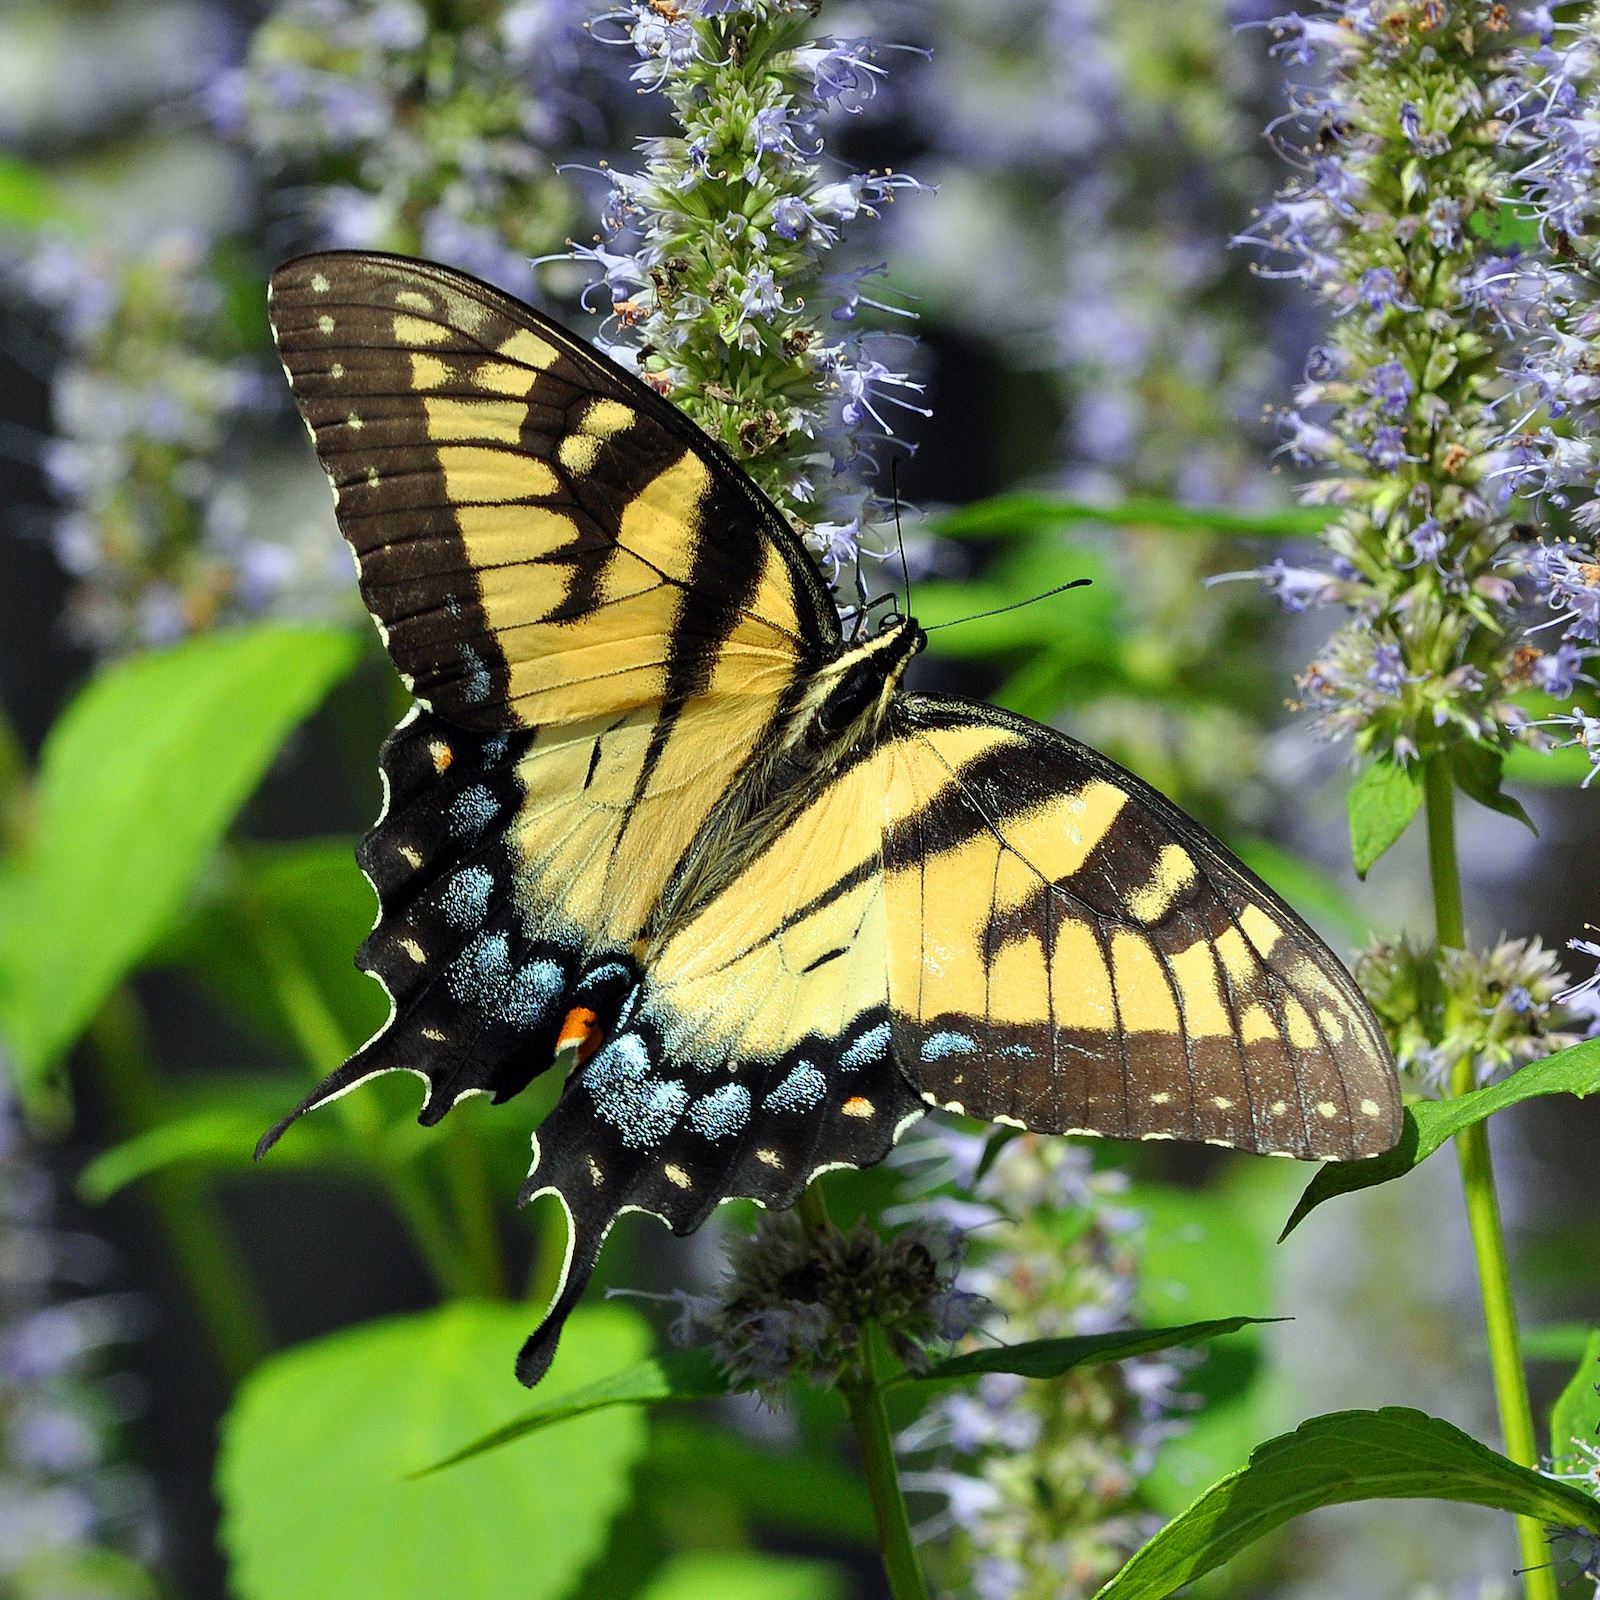 Eastern Tiger Swallowtail Butterfly (Papilio glaucus) feeding on hyssop flower.